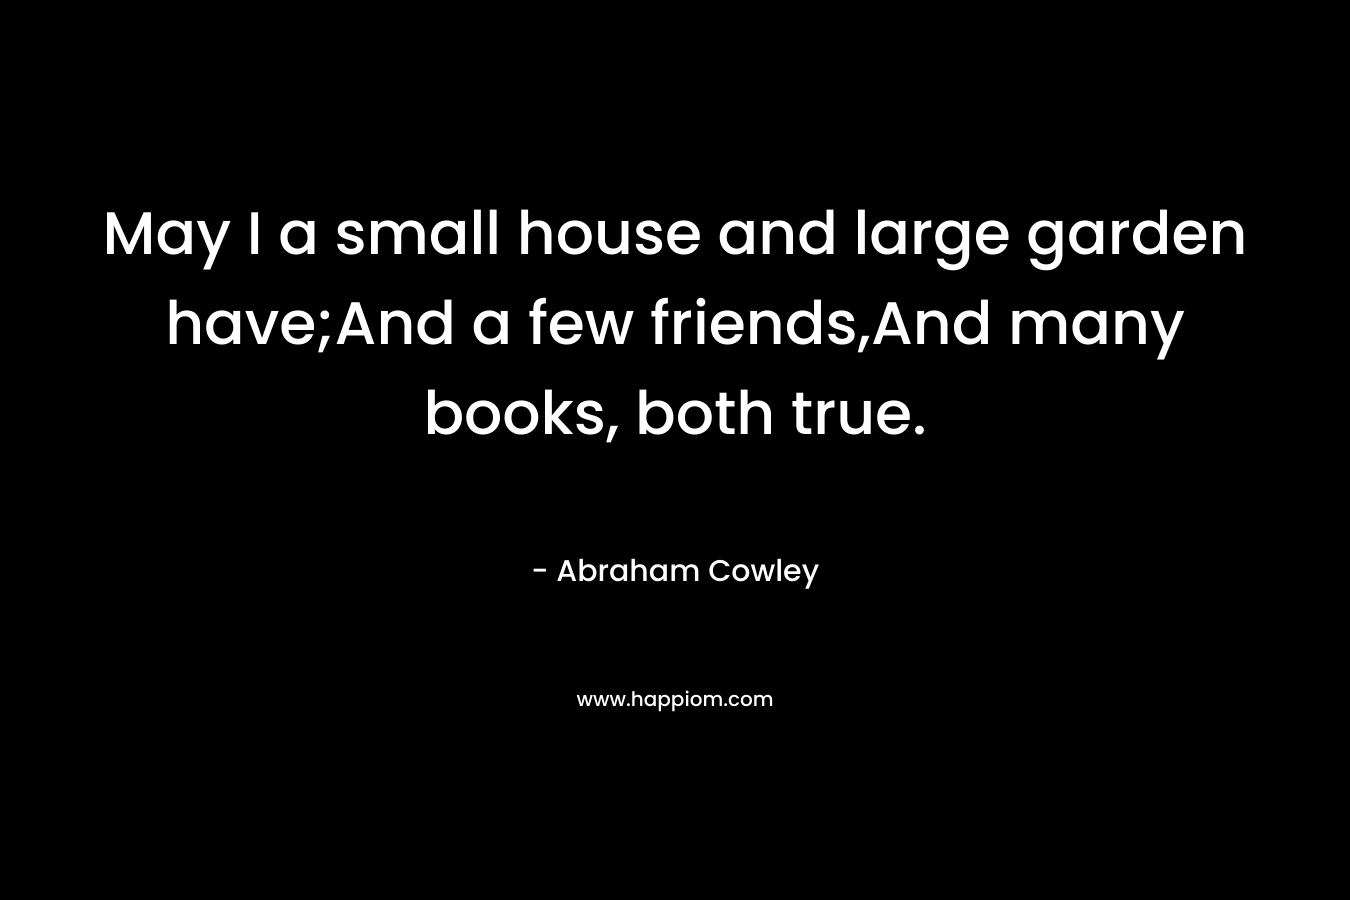 May I a small house and large garden have;And a few friends,And many books, both true.